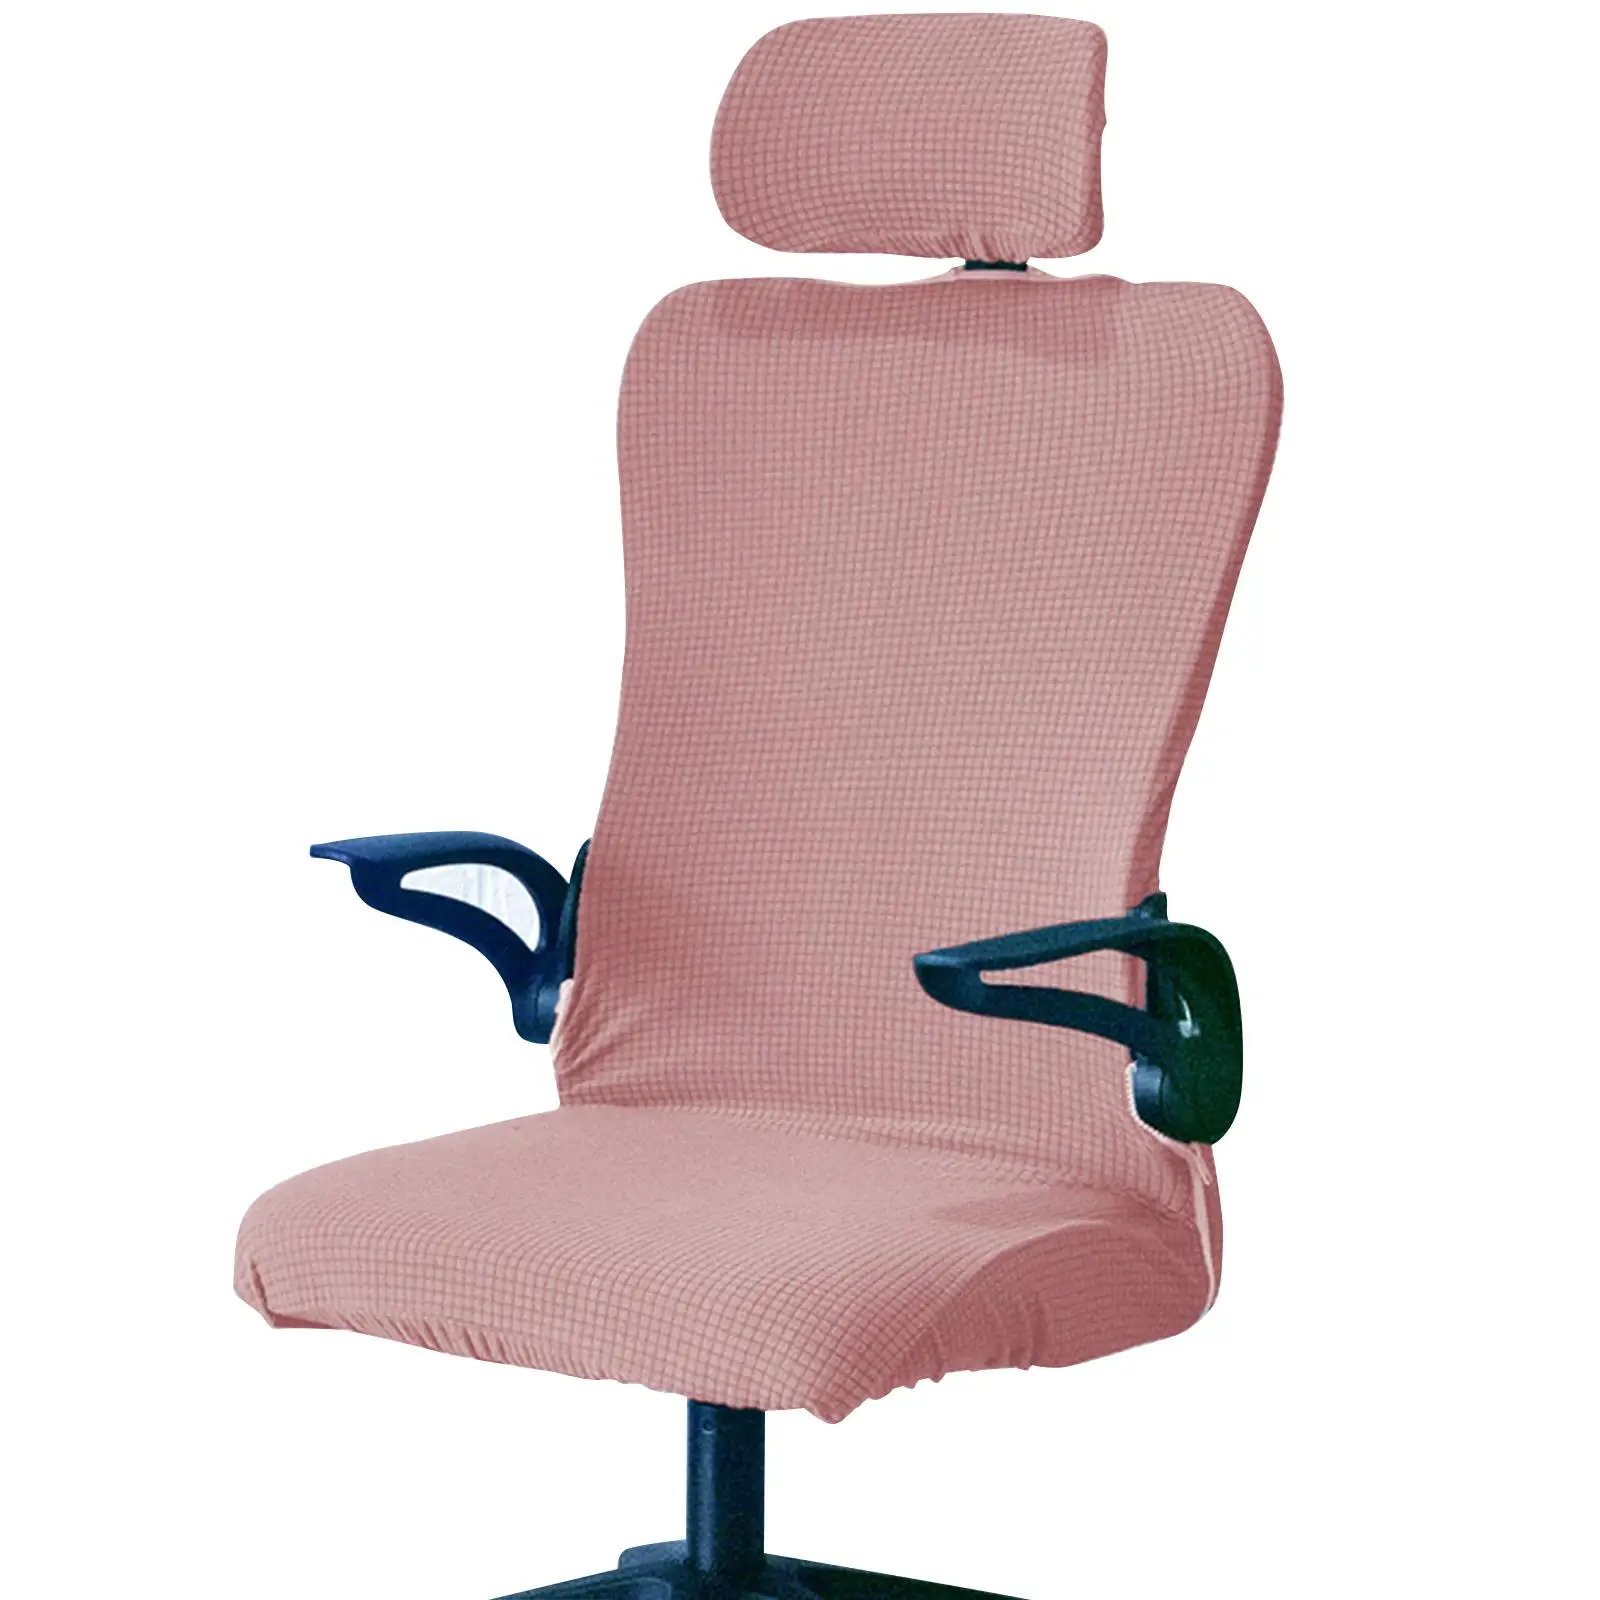 Office Chair Cover with Headrest Cover Washable Stretchable Water Resistant for Dining Room Kitchen Swivel Computer Desk Chairs